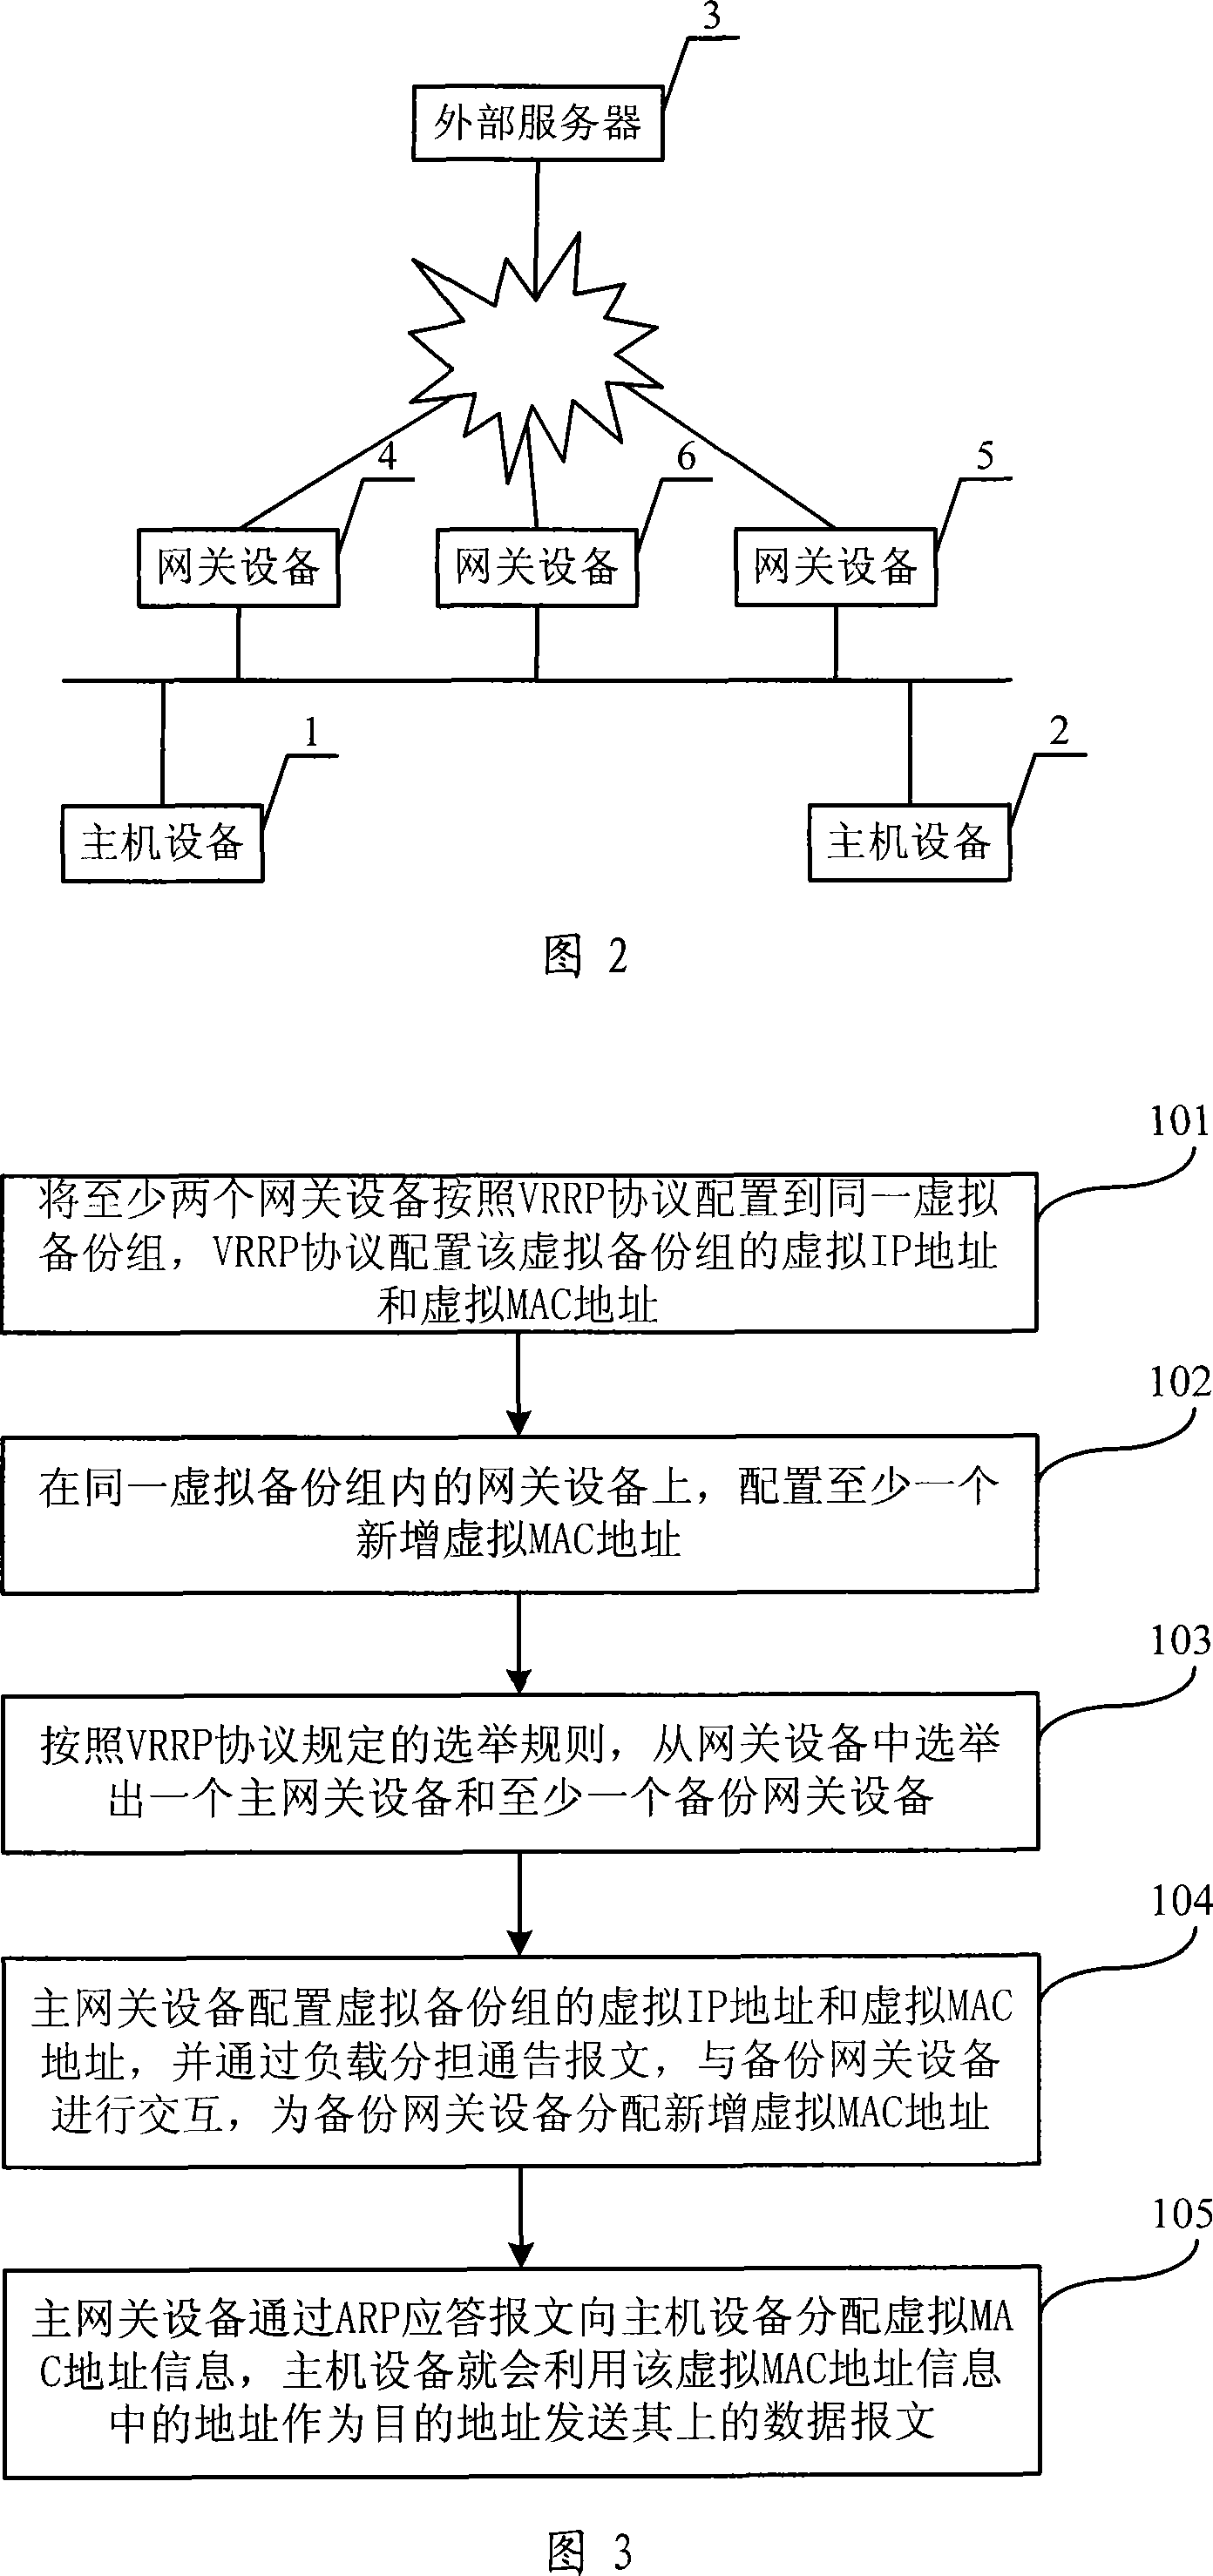 A method and system to realize gateway dynamic load sharing